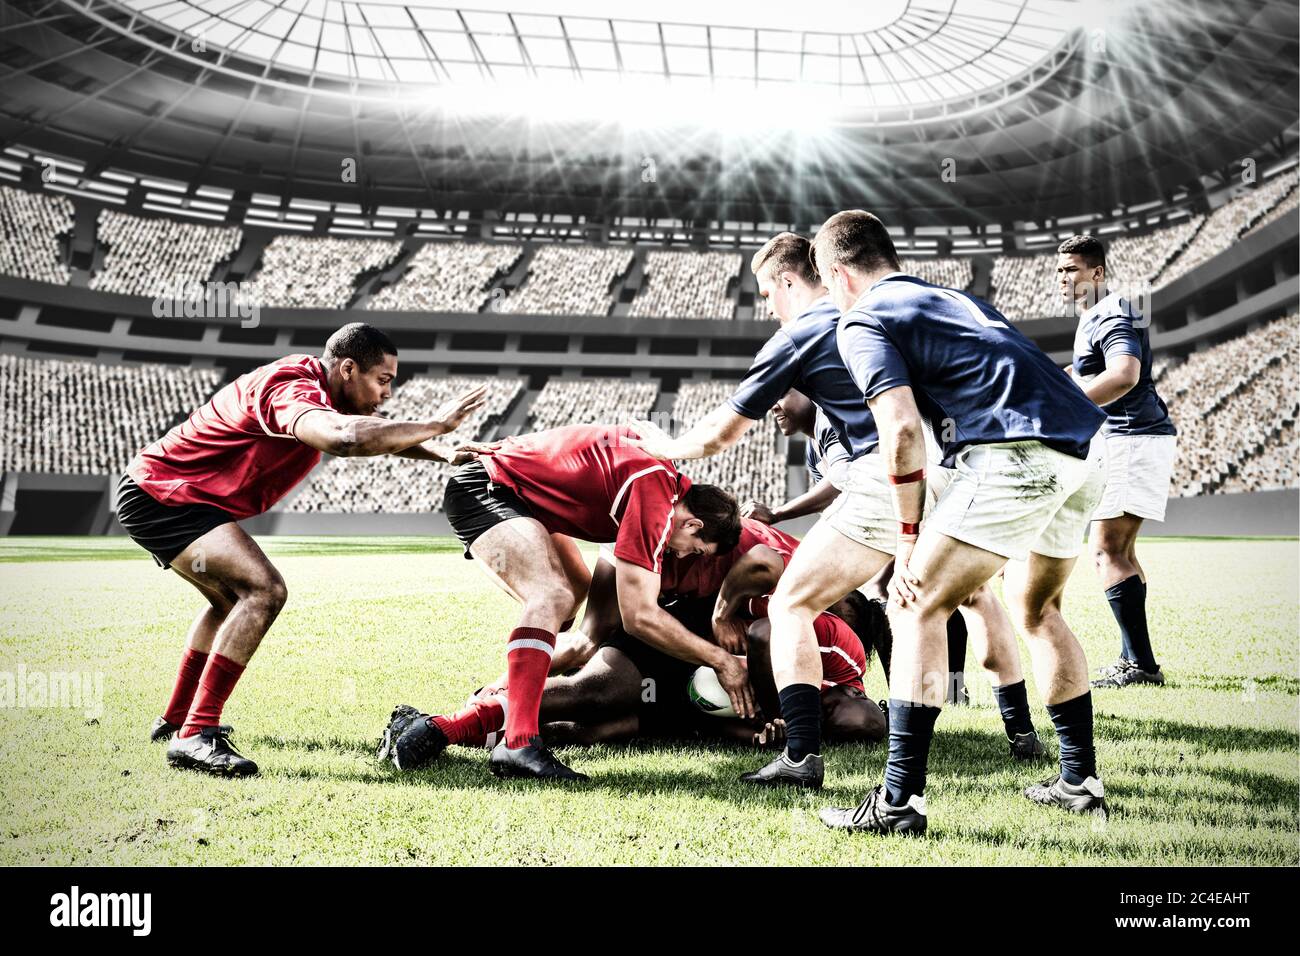 Digital composite image of team of rugby players tackling each other to win the ball in sports stadi Stock Photo